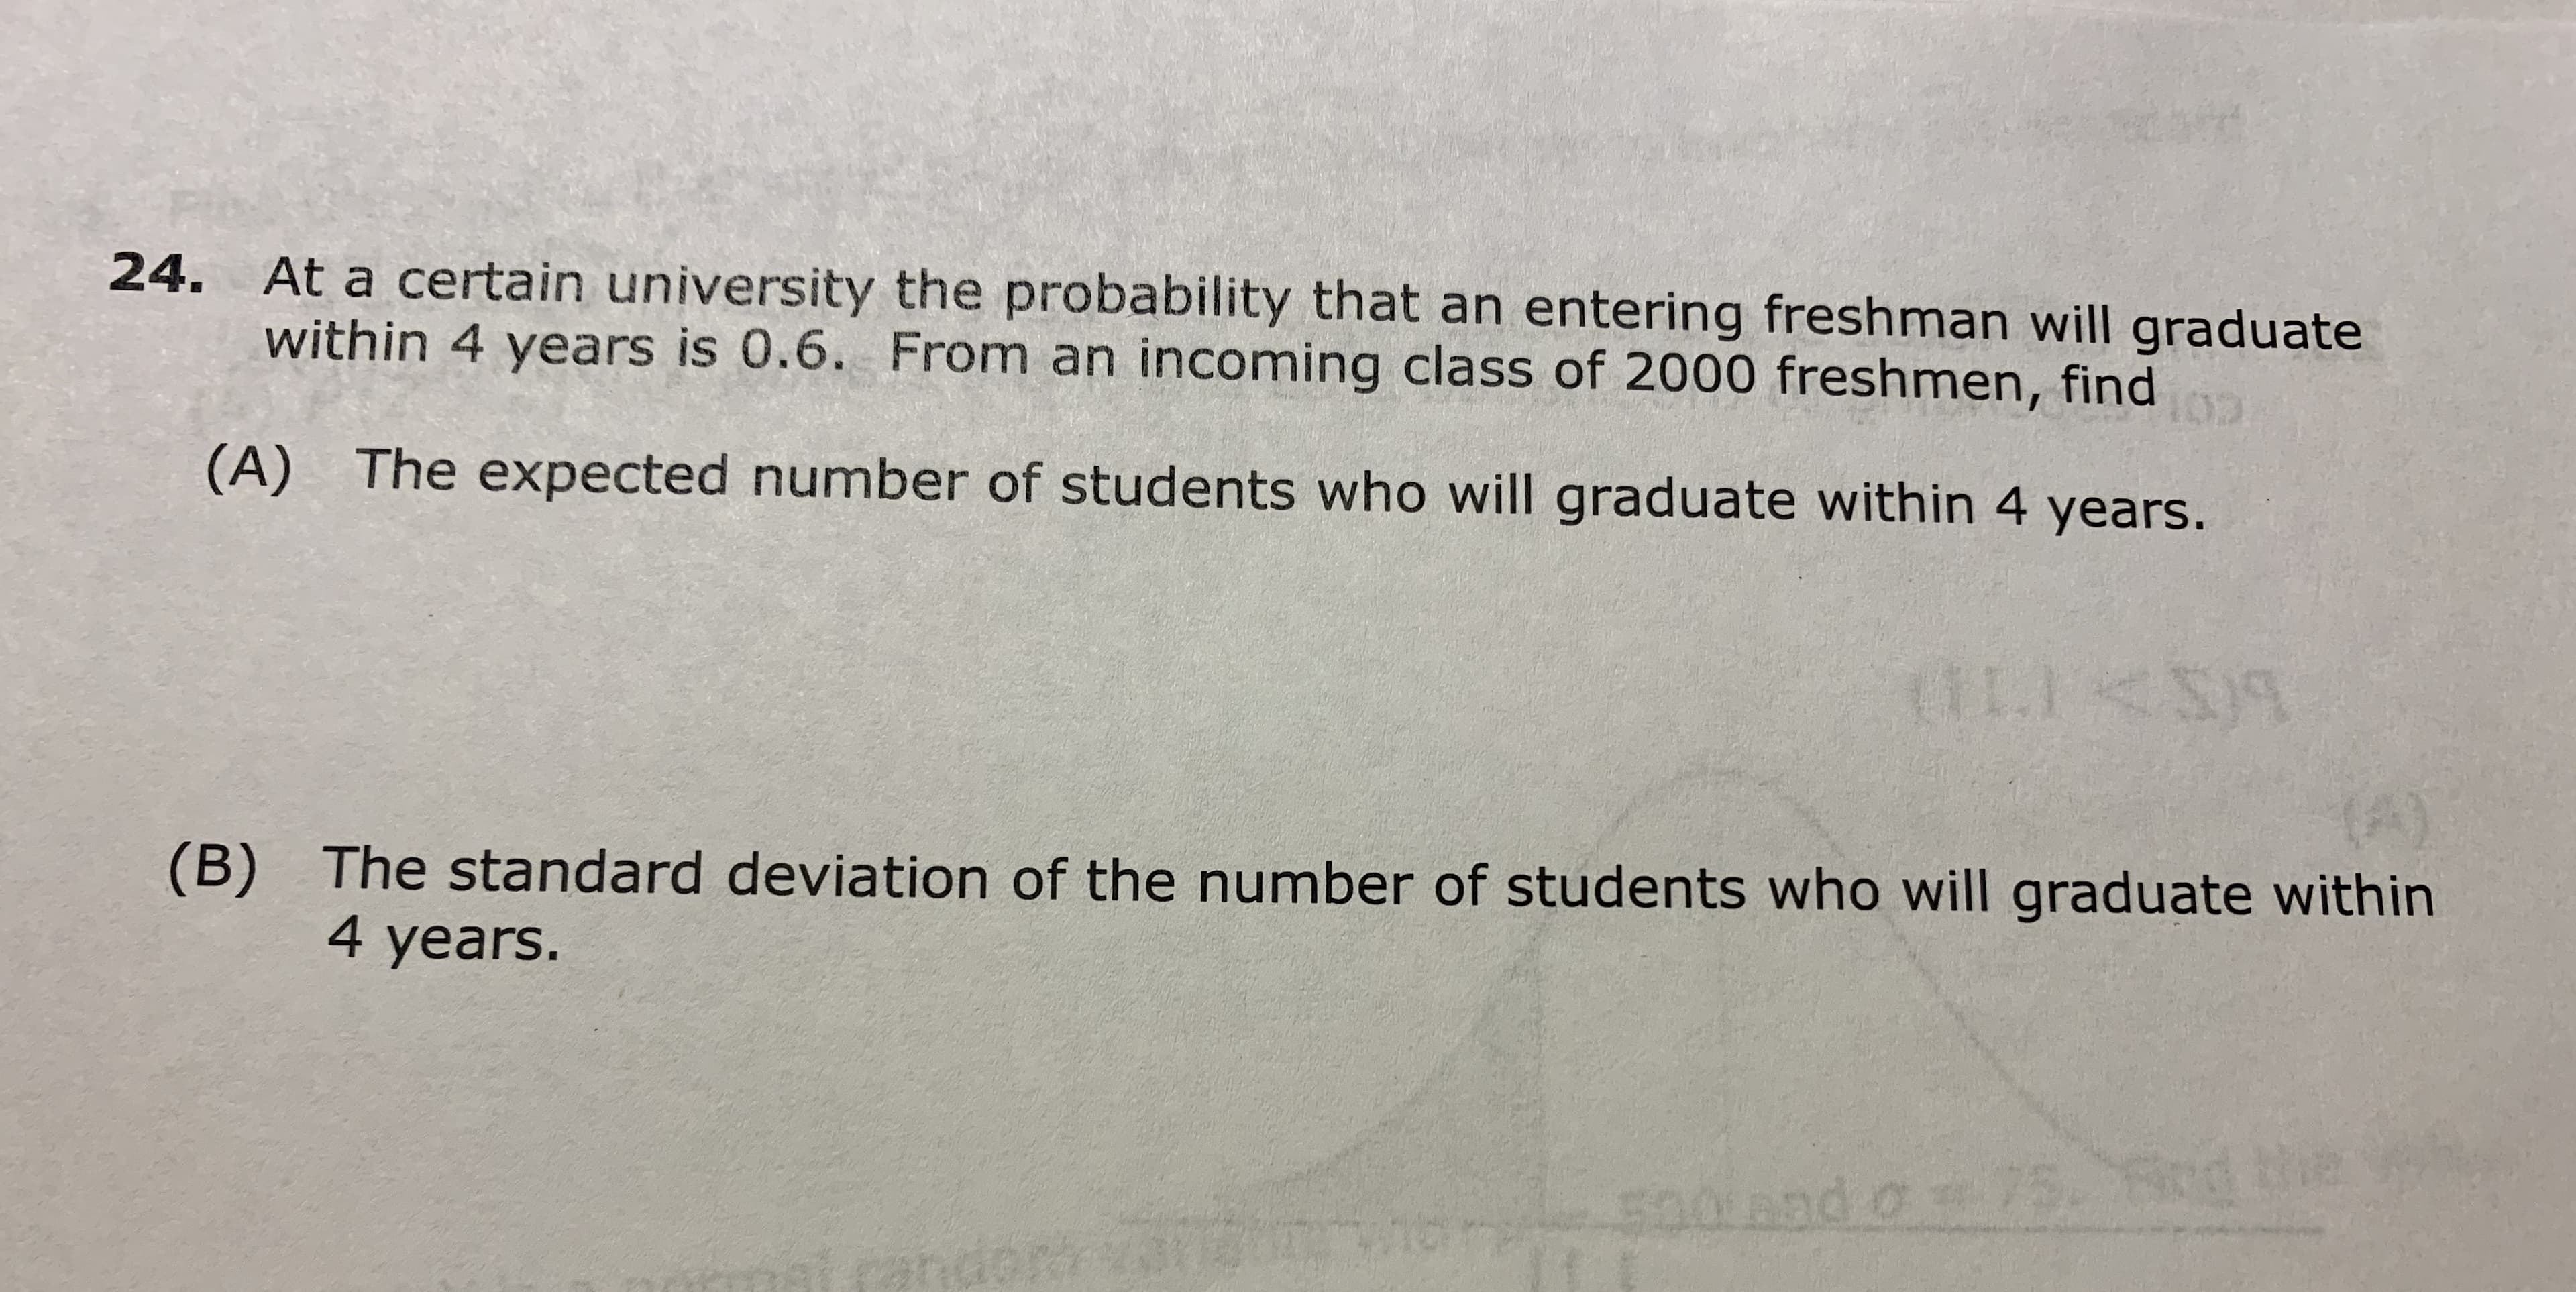 24. At a certain university the probability that an entering freshman will graduate
within 4 years is 0.6. From an incoming class of 2000 freshmen, find
(A) The expected number of students who will graduate within 4 years.
LE I
S)9
(B) The standard deviation of the number of students who will graduate within
4 years.
S00 0d o 75
